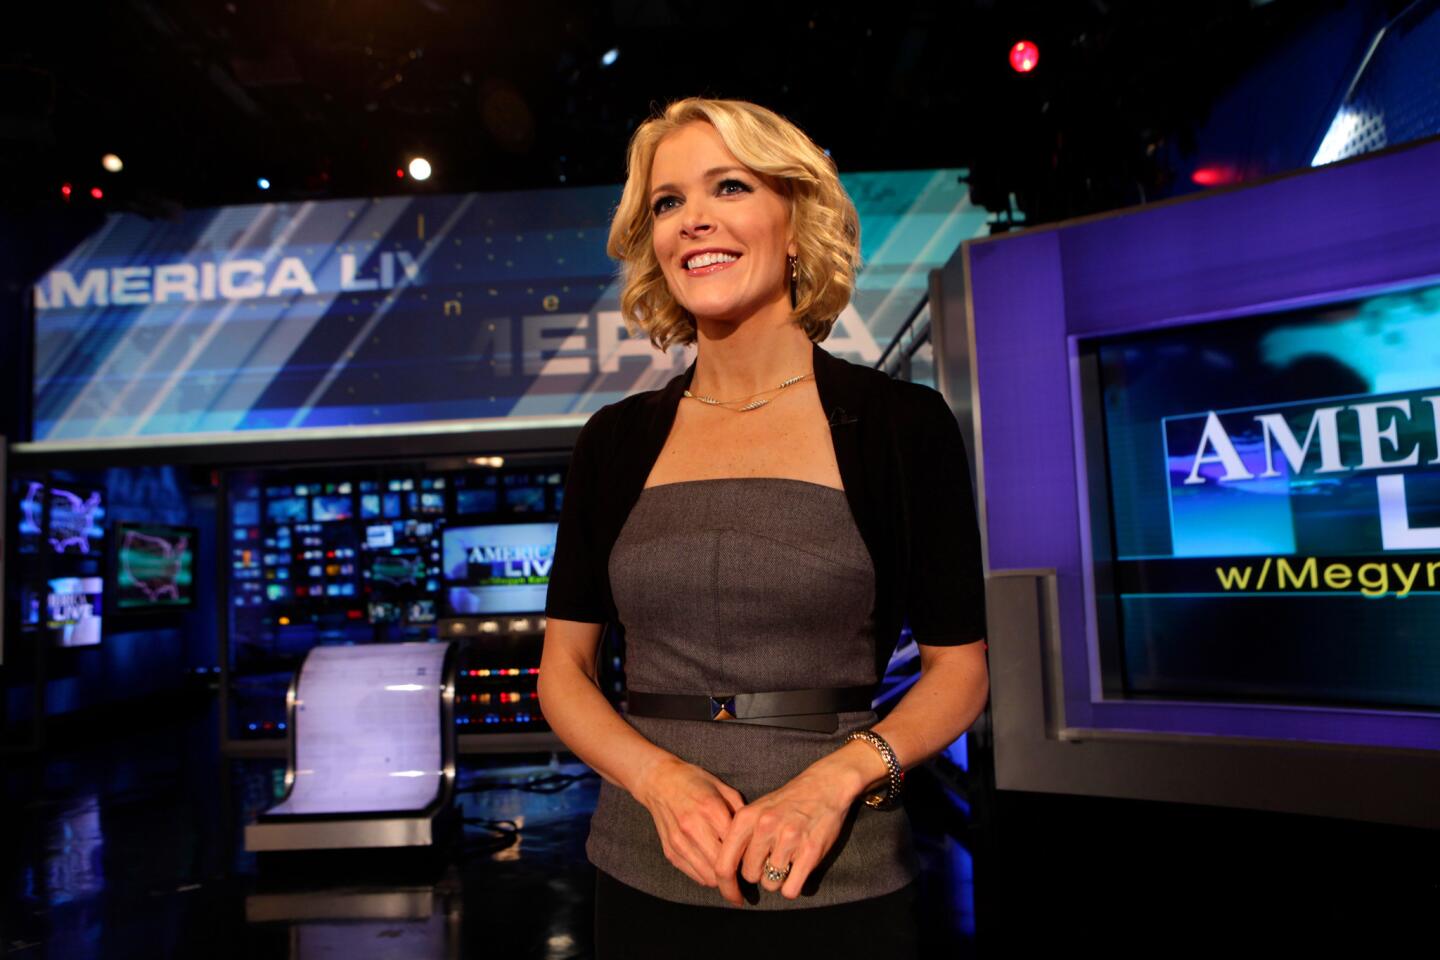 Megyn Kelly was the host of Fox News shows such as "The Kelly File" (2013-17) and "America Live" (2010-13).